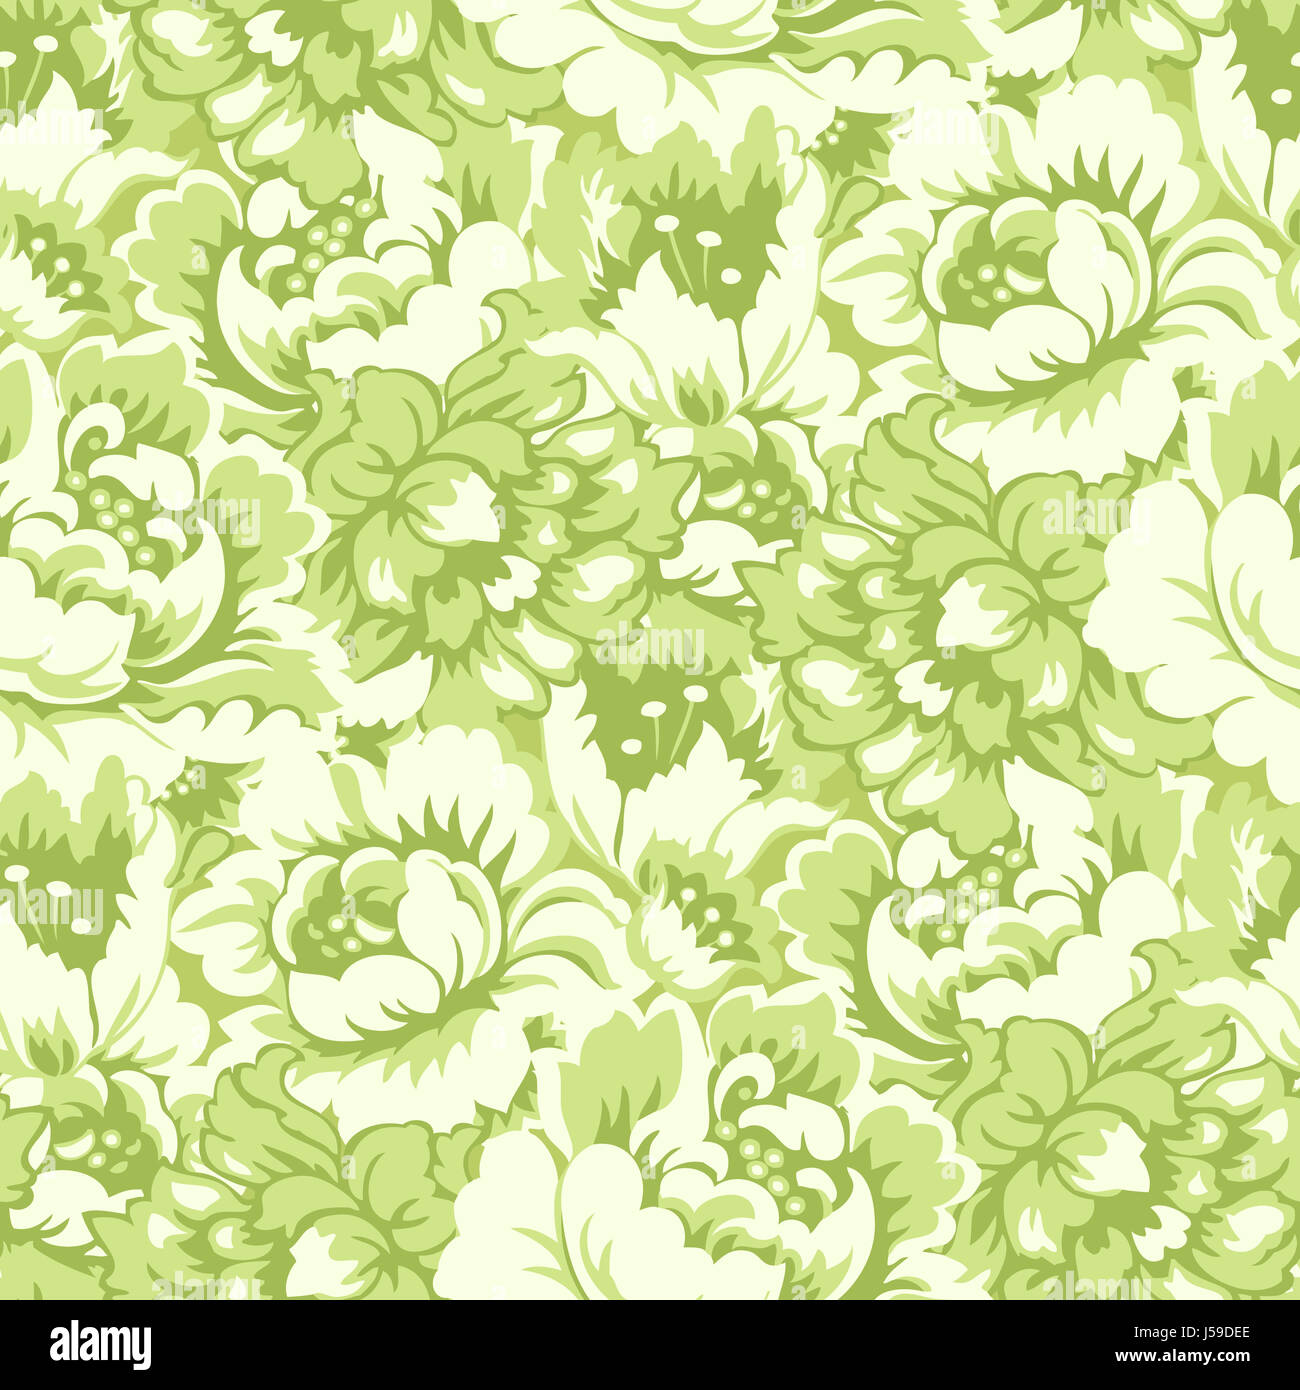 Allover floral seamless pattern design Stock Photo